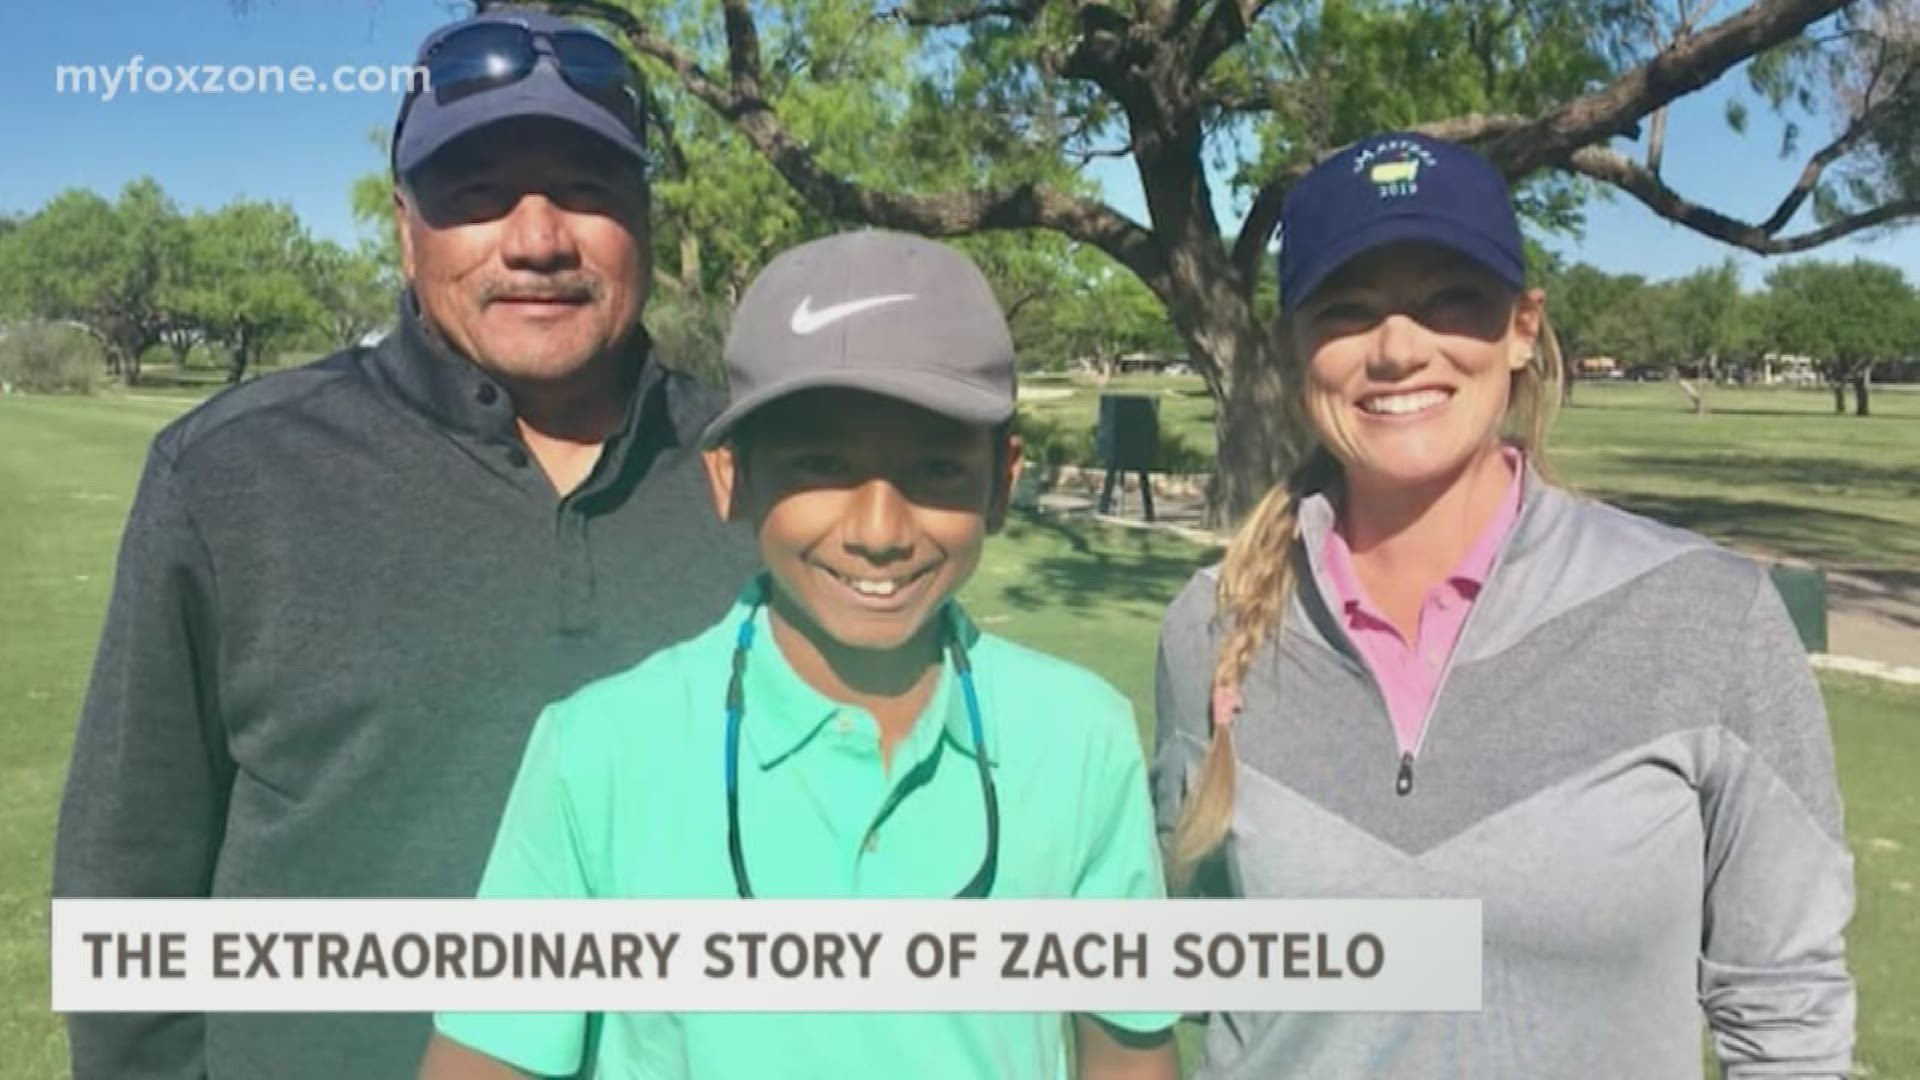 Zachary Sotelo has found a new love for a sport and a new love from a family who has embraced the extraordinary young man he has become.